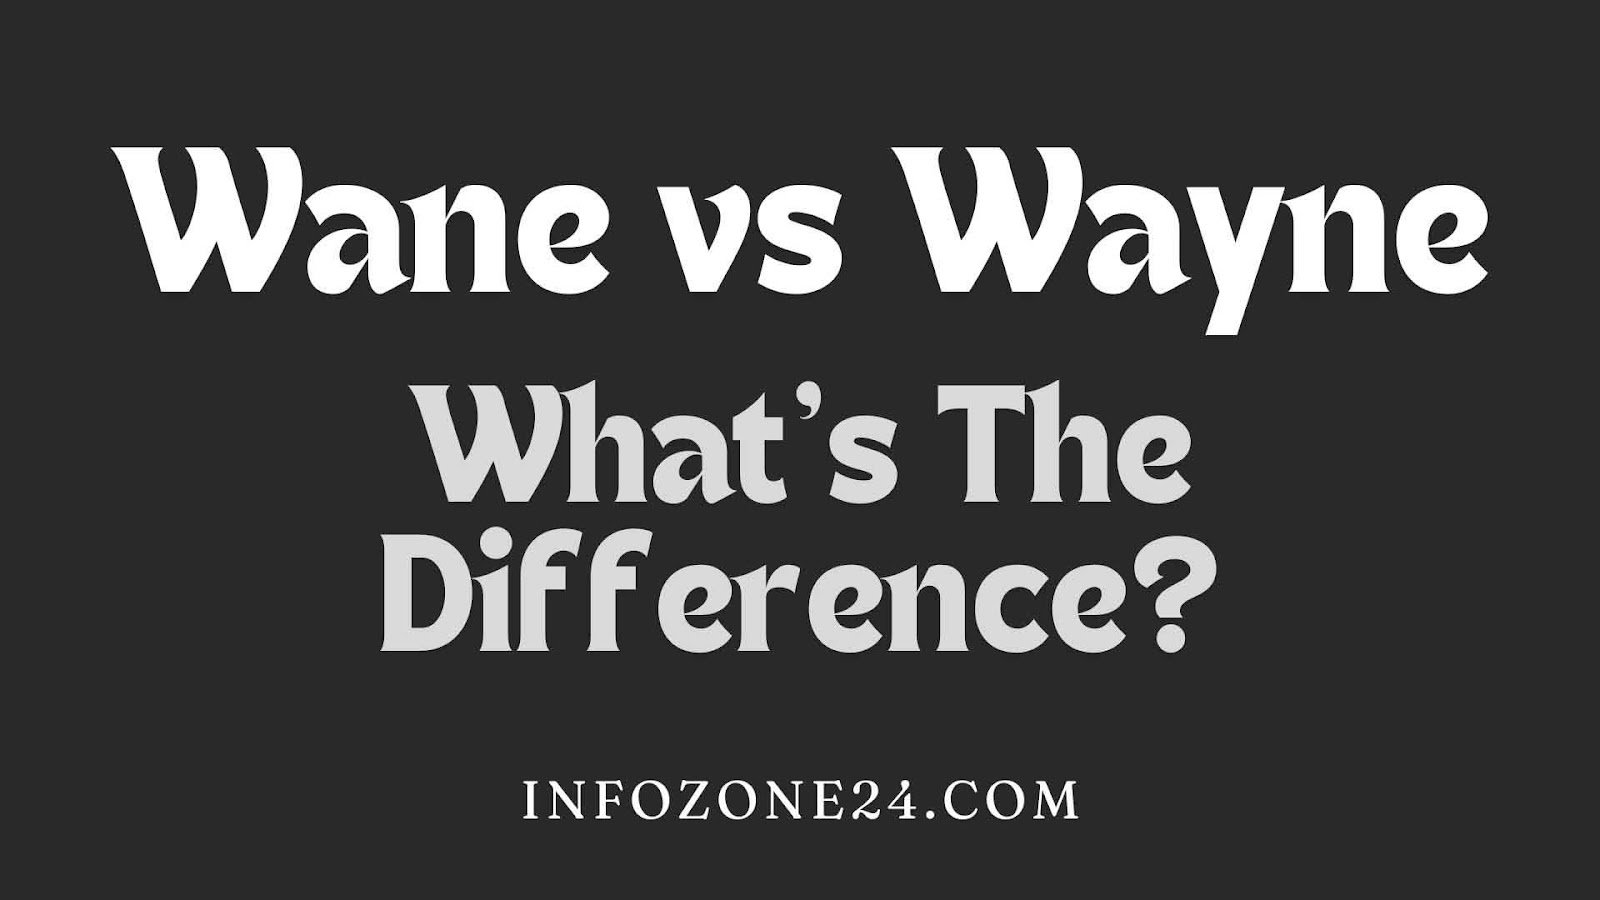 Wane Vs Wayne: What’s The Difference?